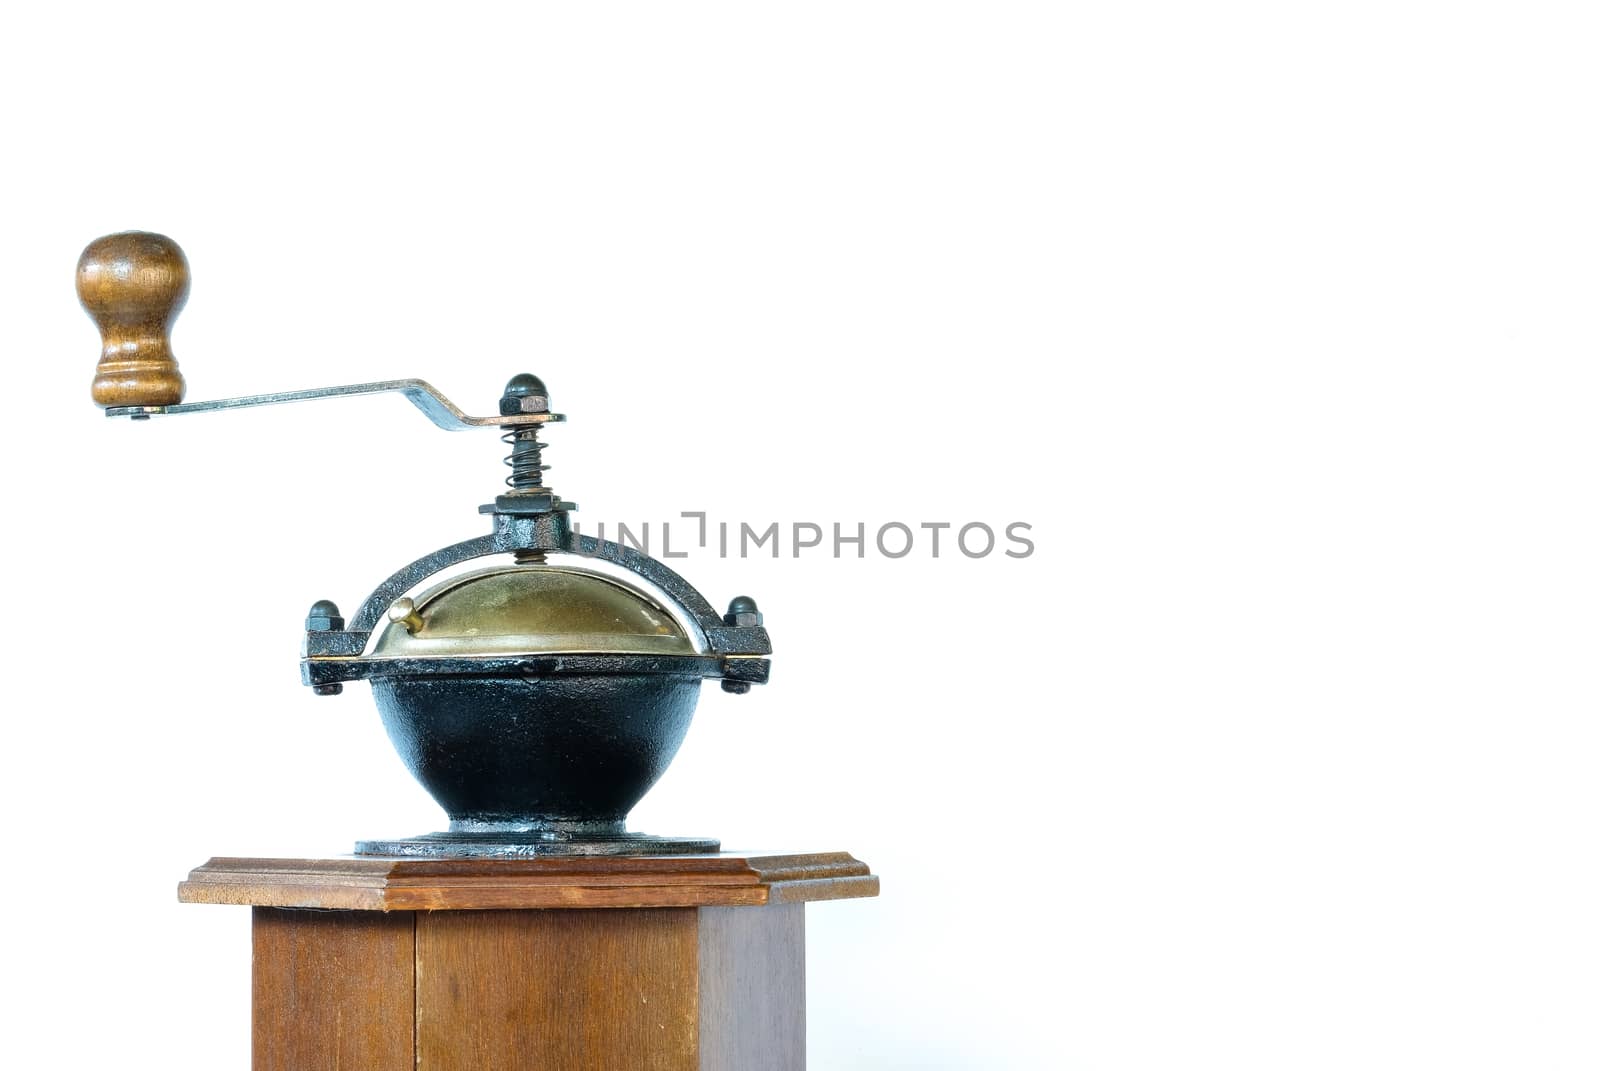 a vintage coffee grinder with intricate metal part, isolaed on white background